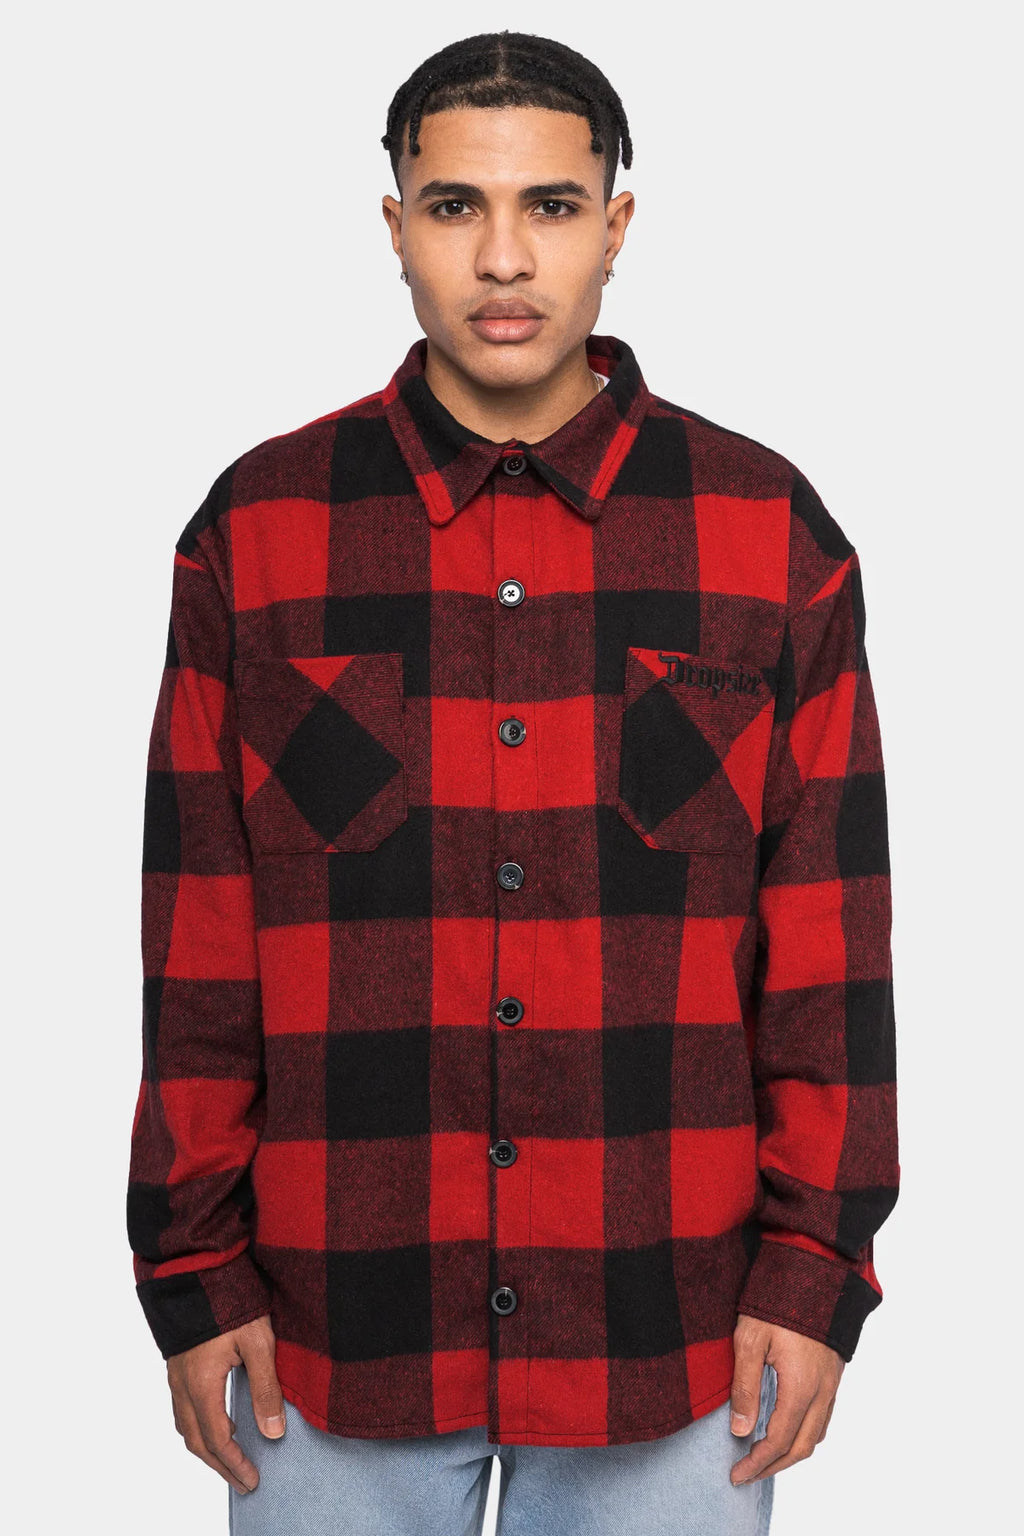 Dropsize Heavy Flannel Shirt  Black/Red